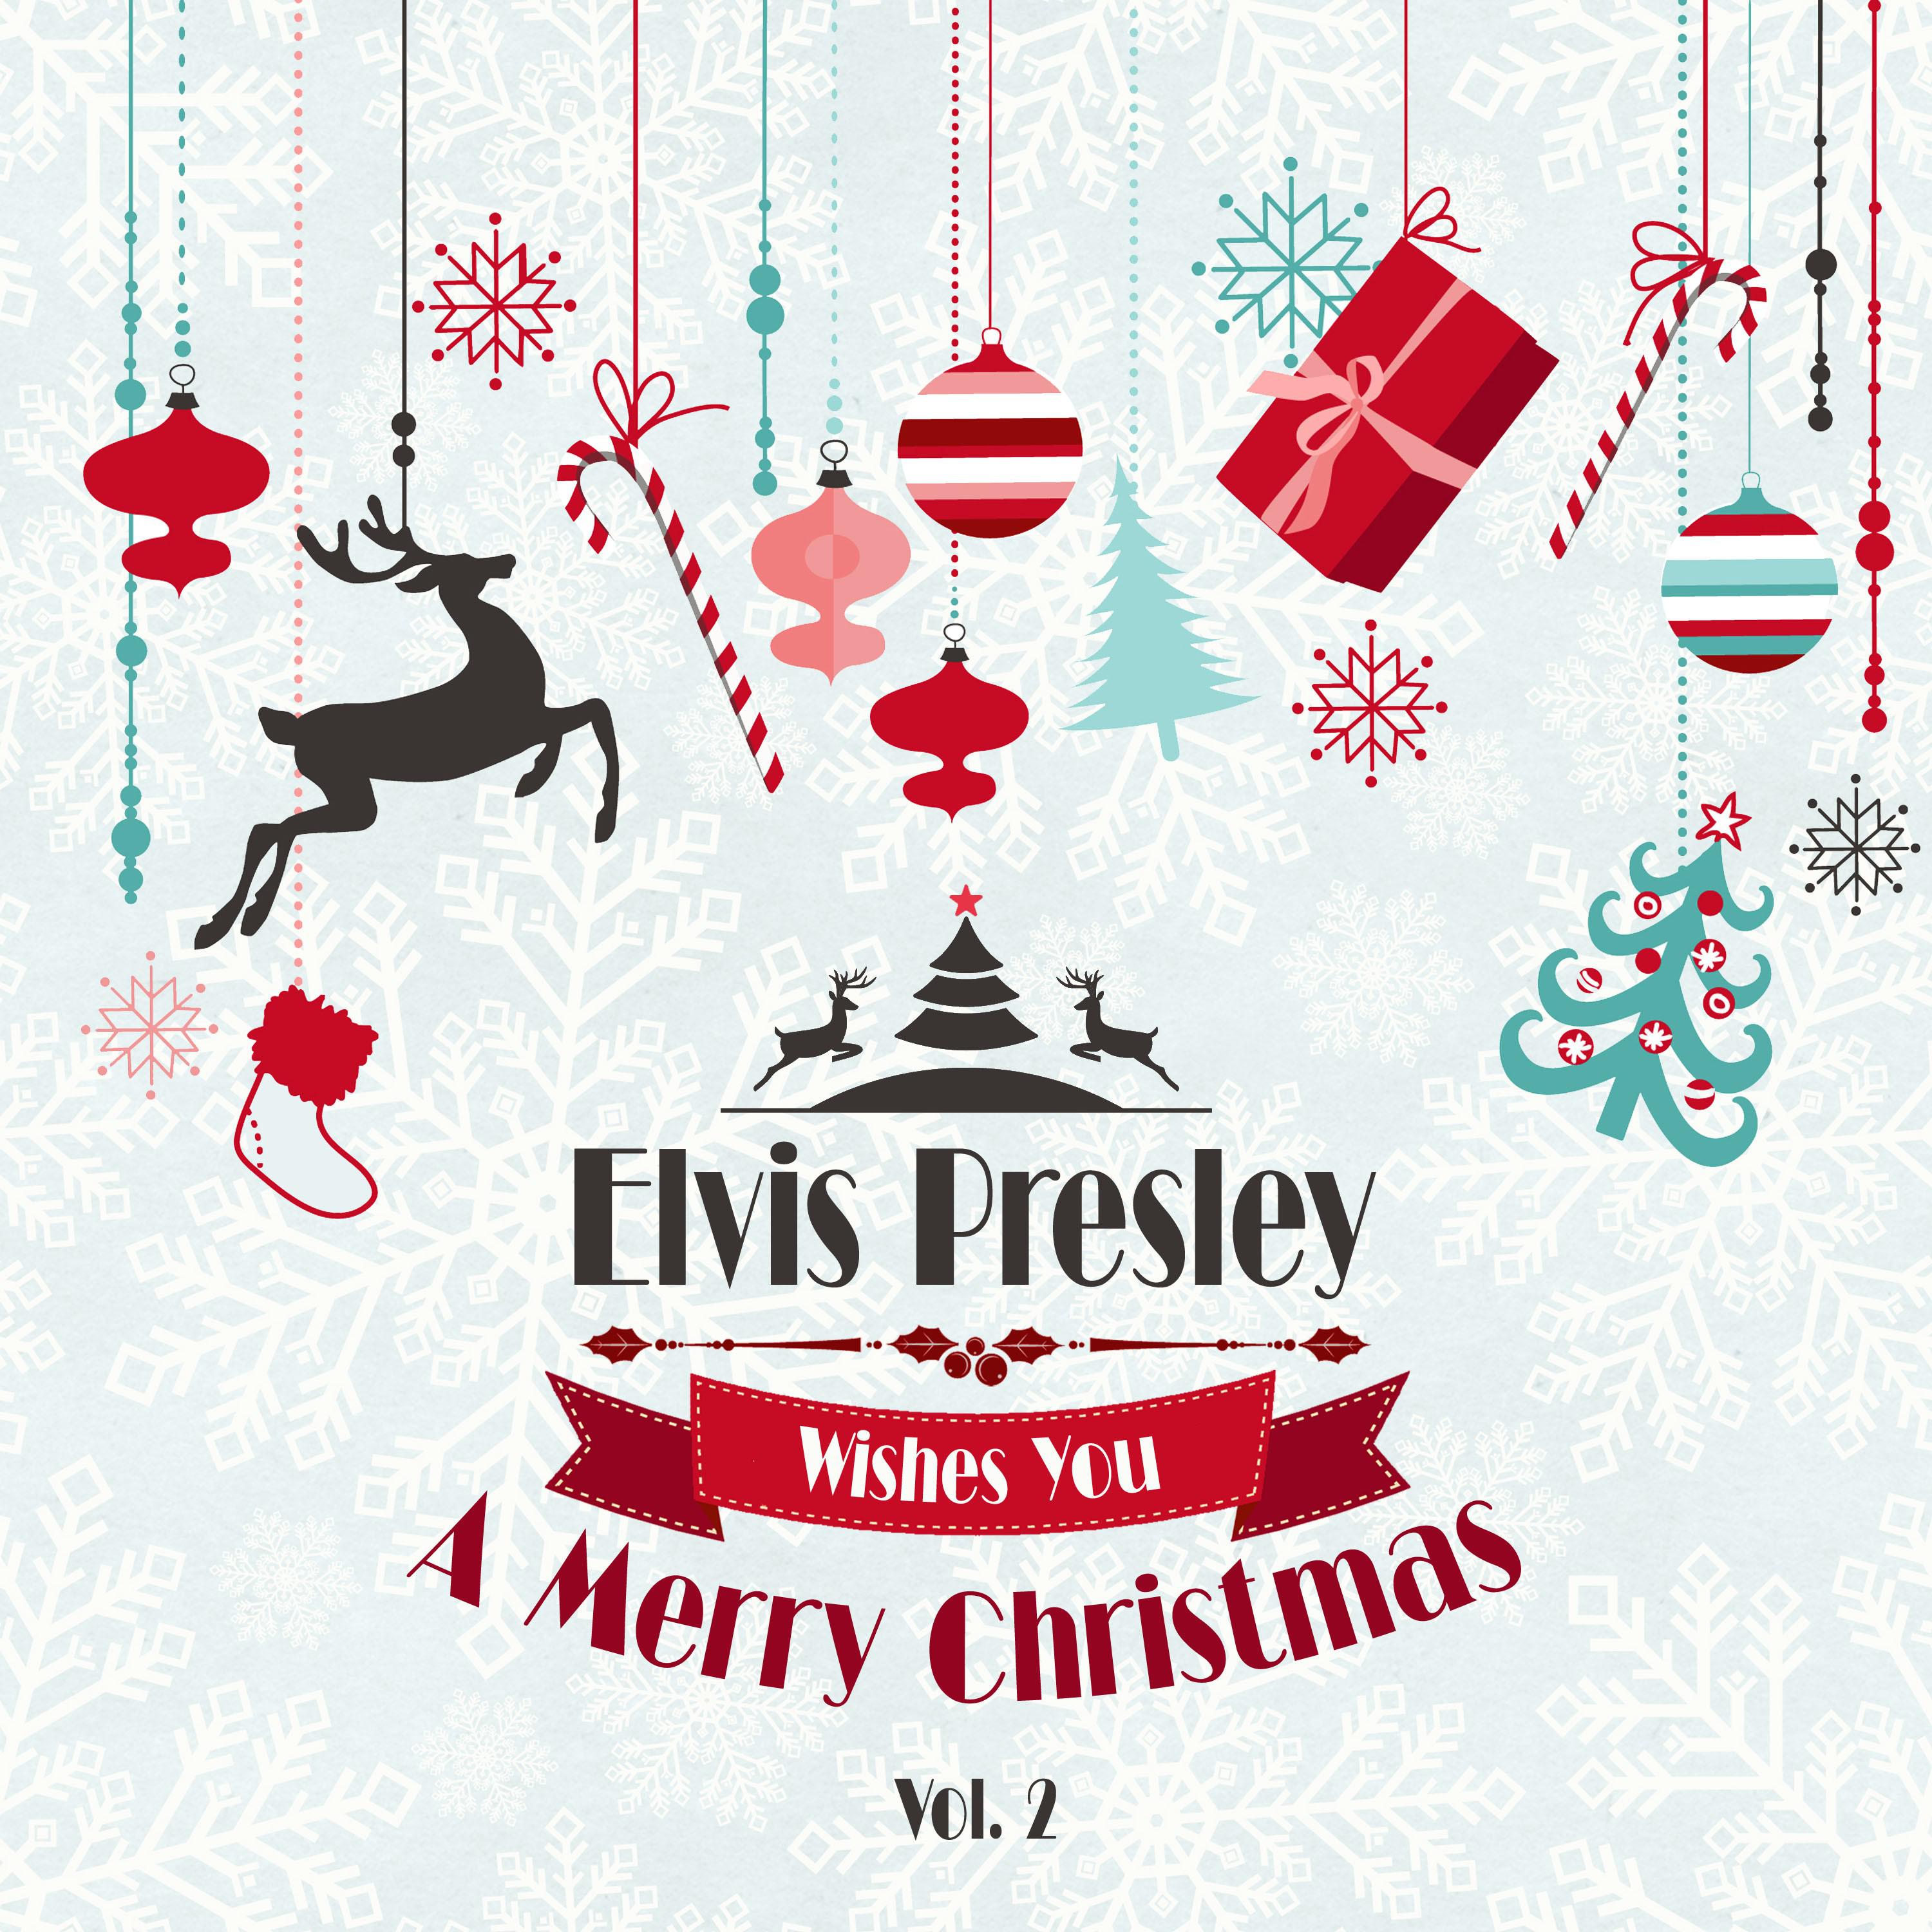 Elvis Presley Wishes You a Merry Christmas, Vol. 2